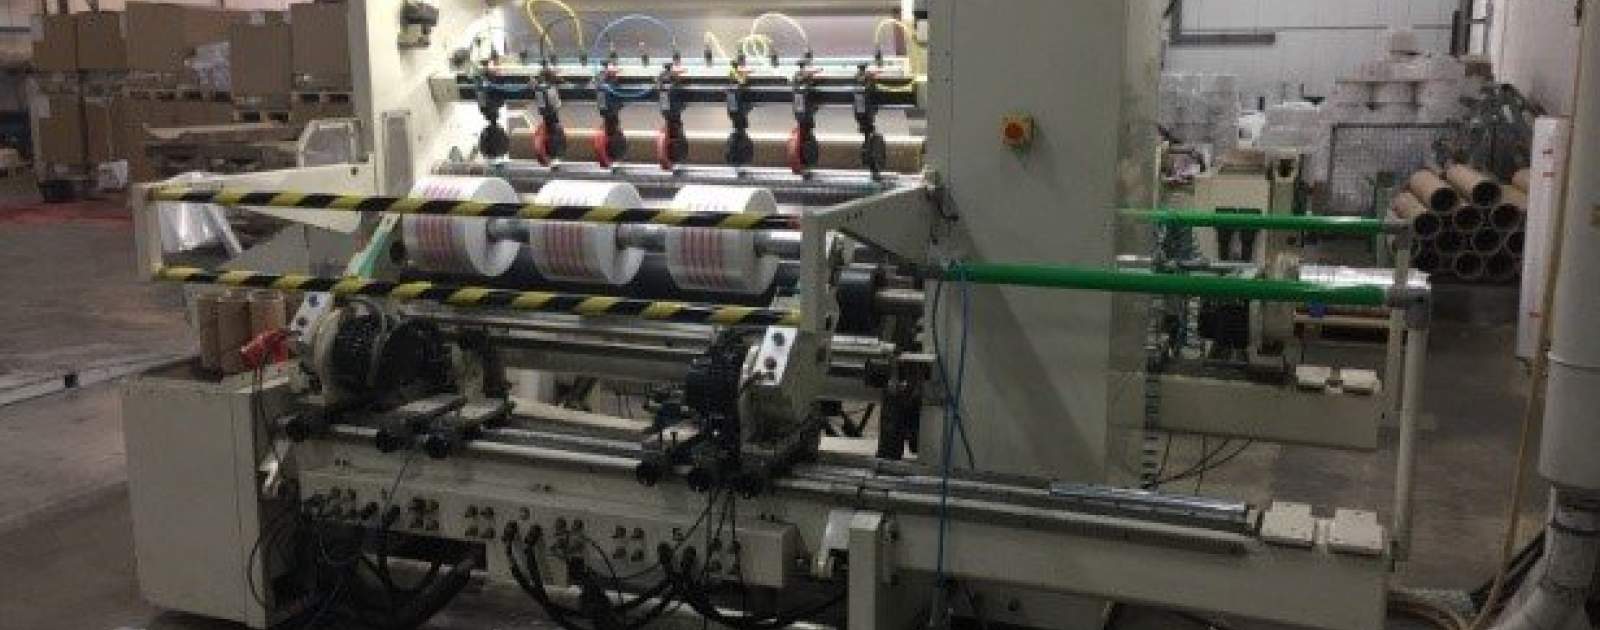 Used Euromac TB6 slitter rewinder for sale